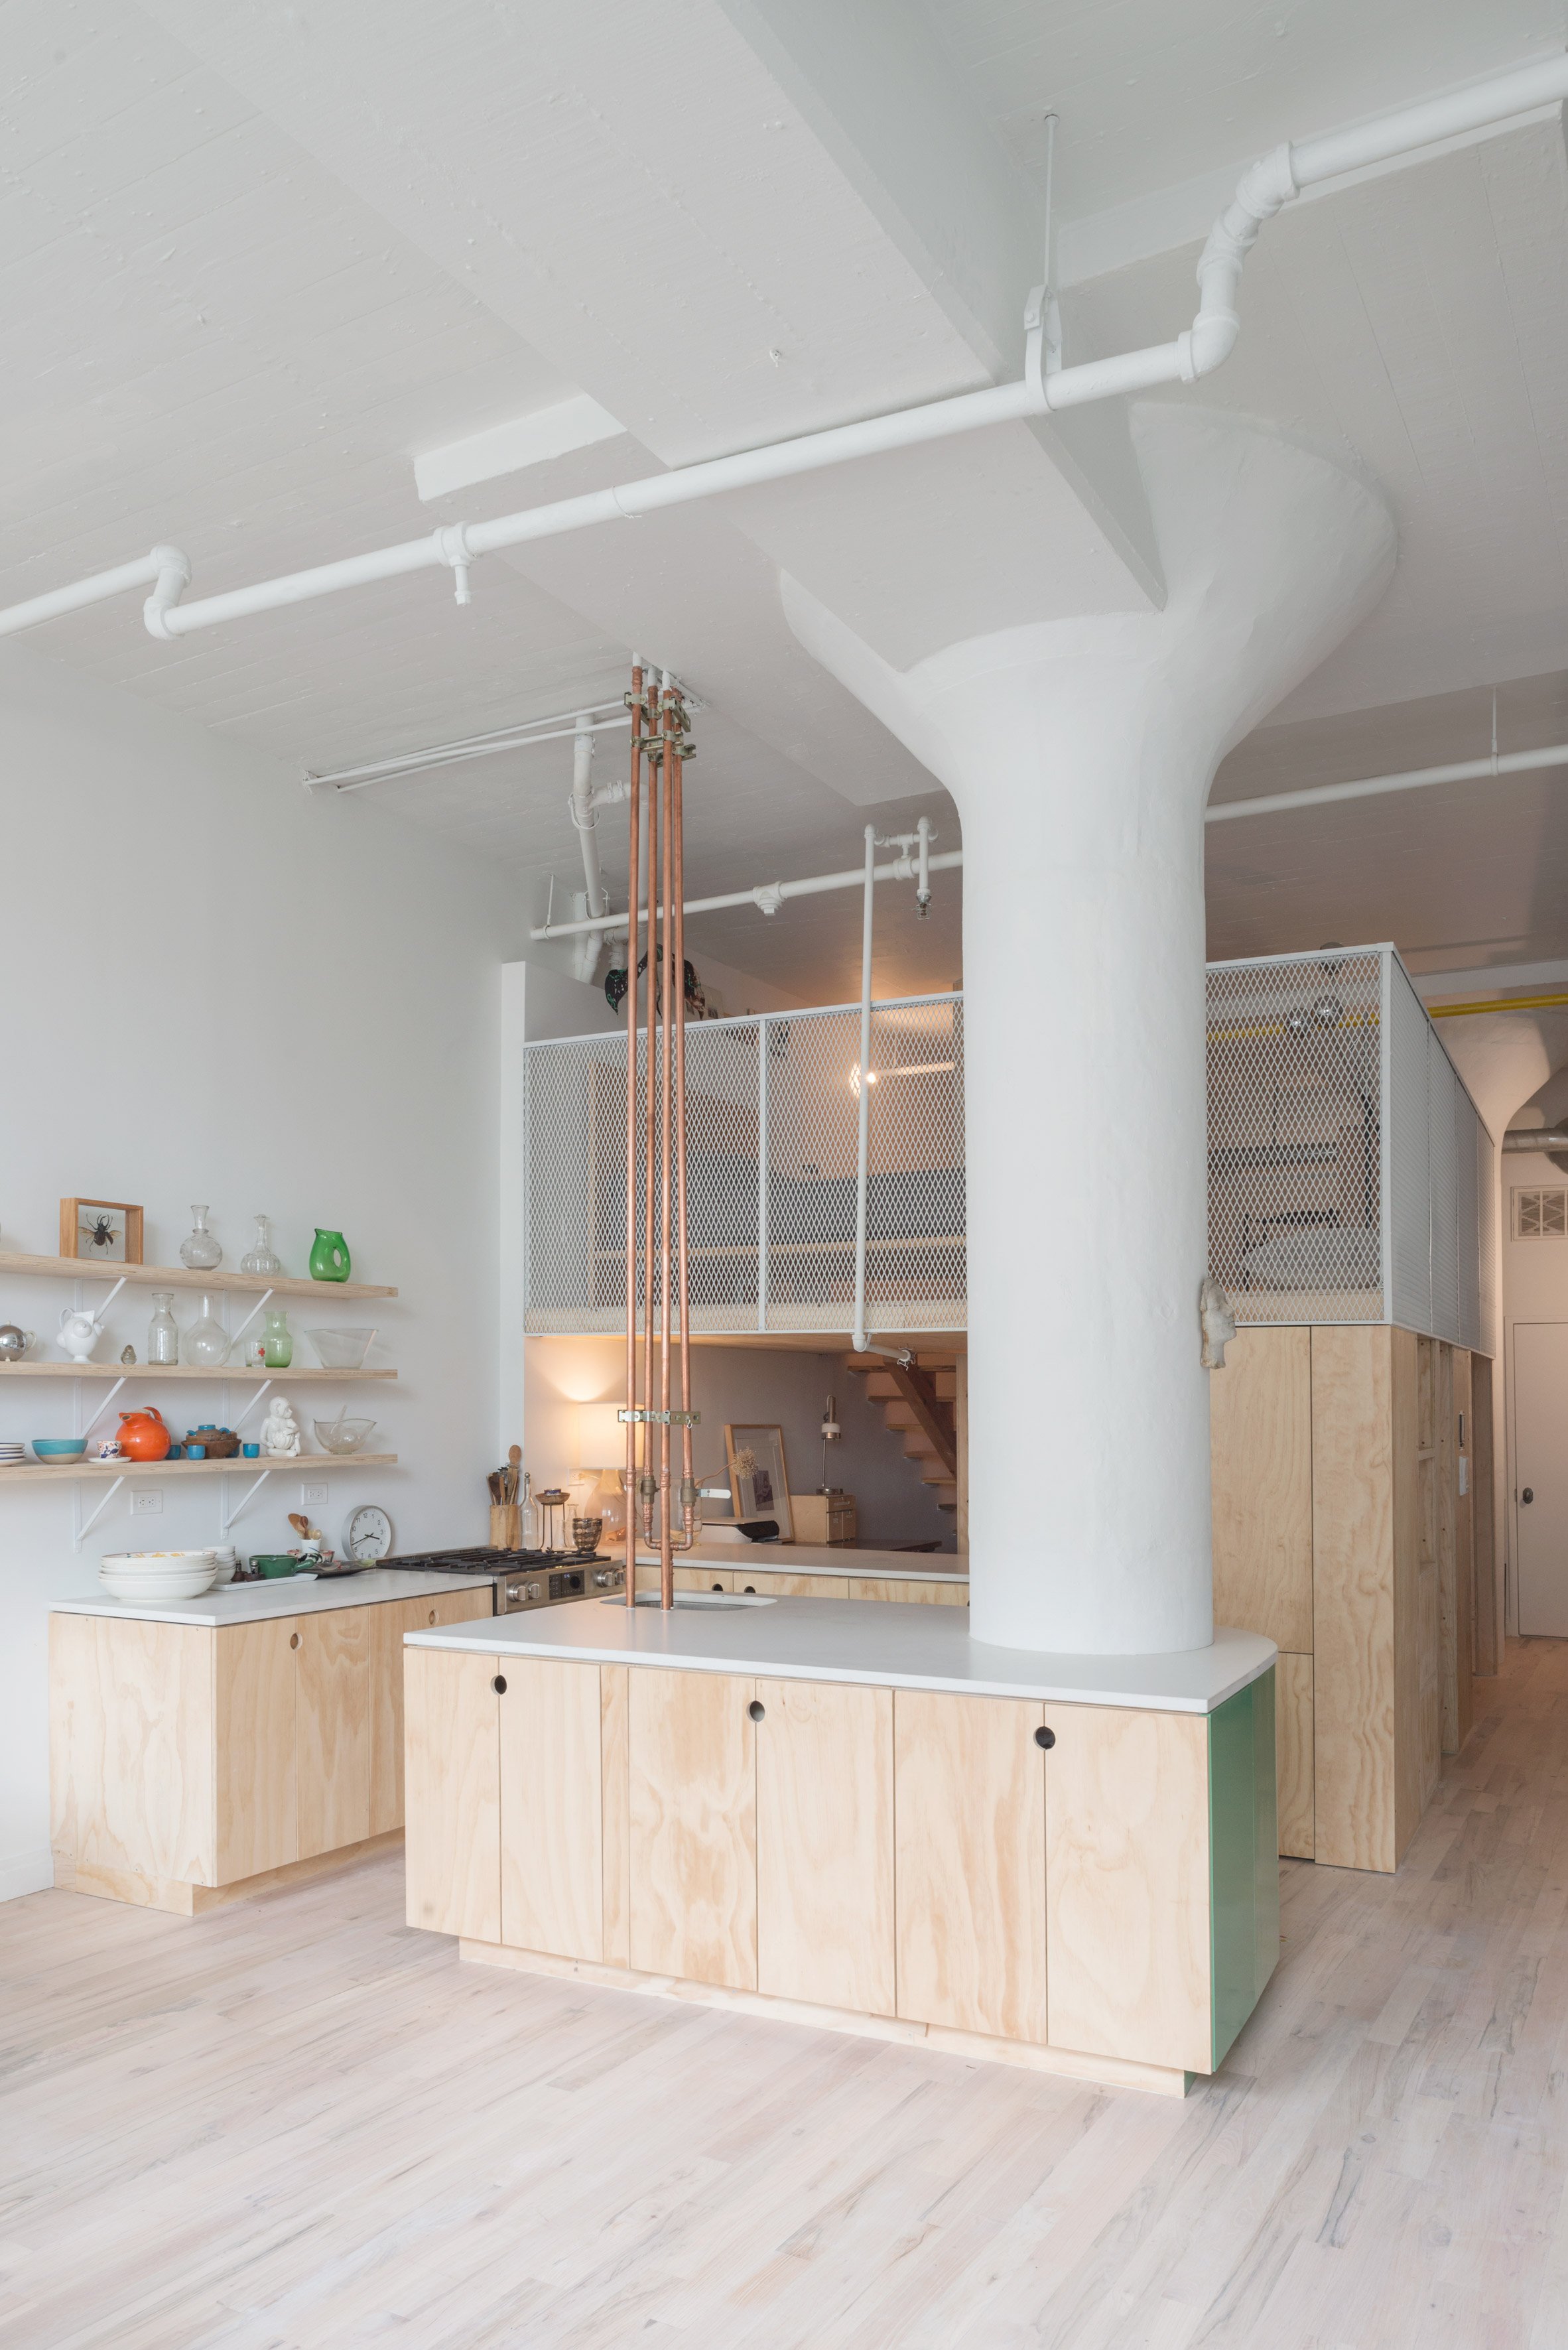 Bed-Stuy Loft by New Affiliates